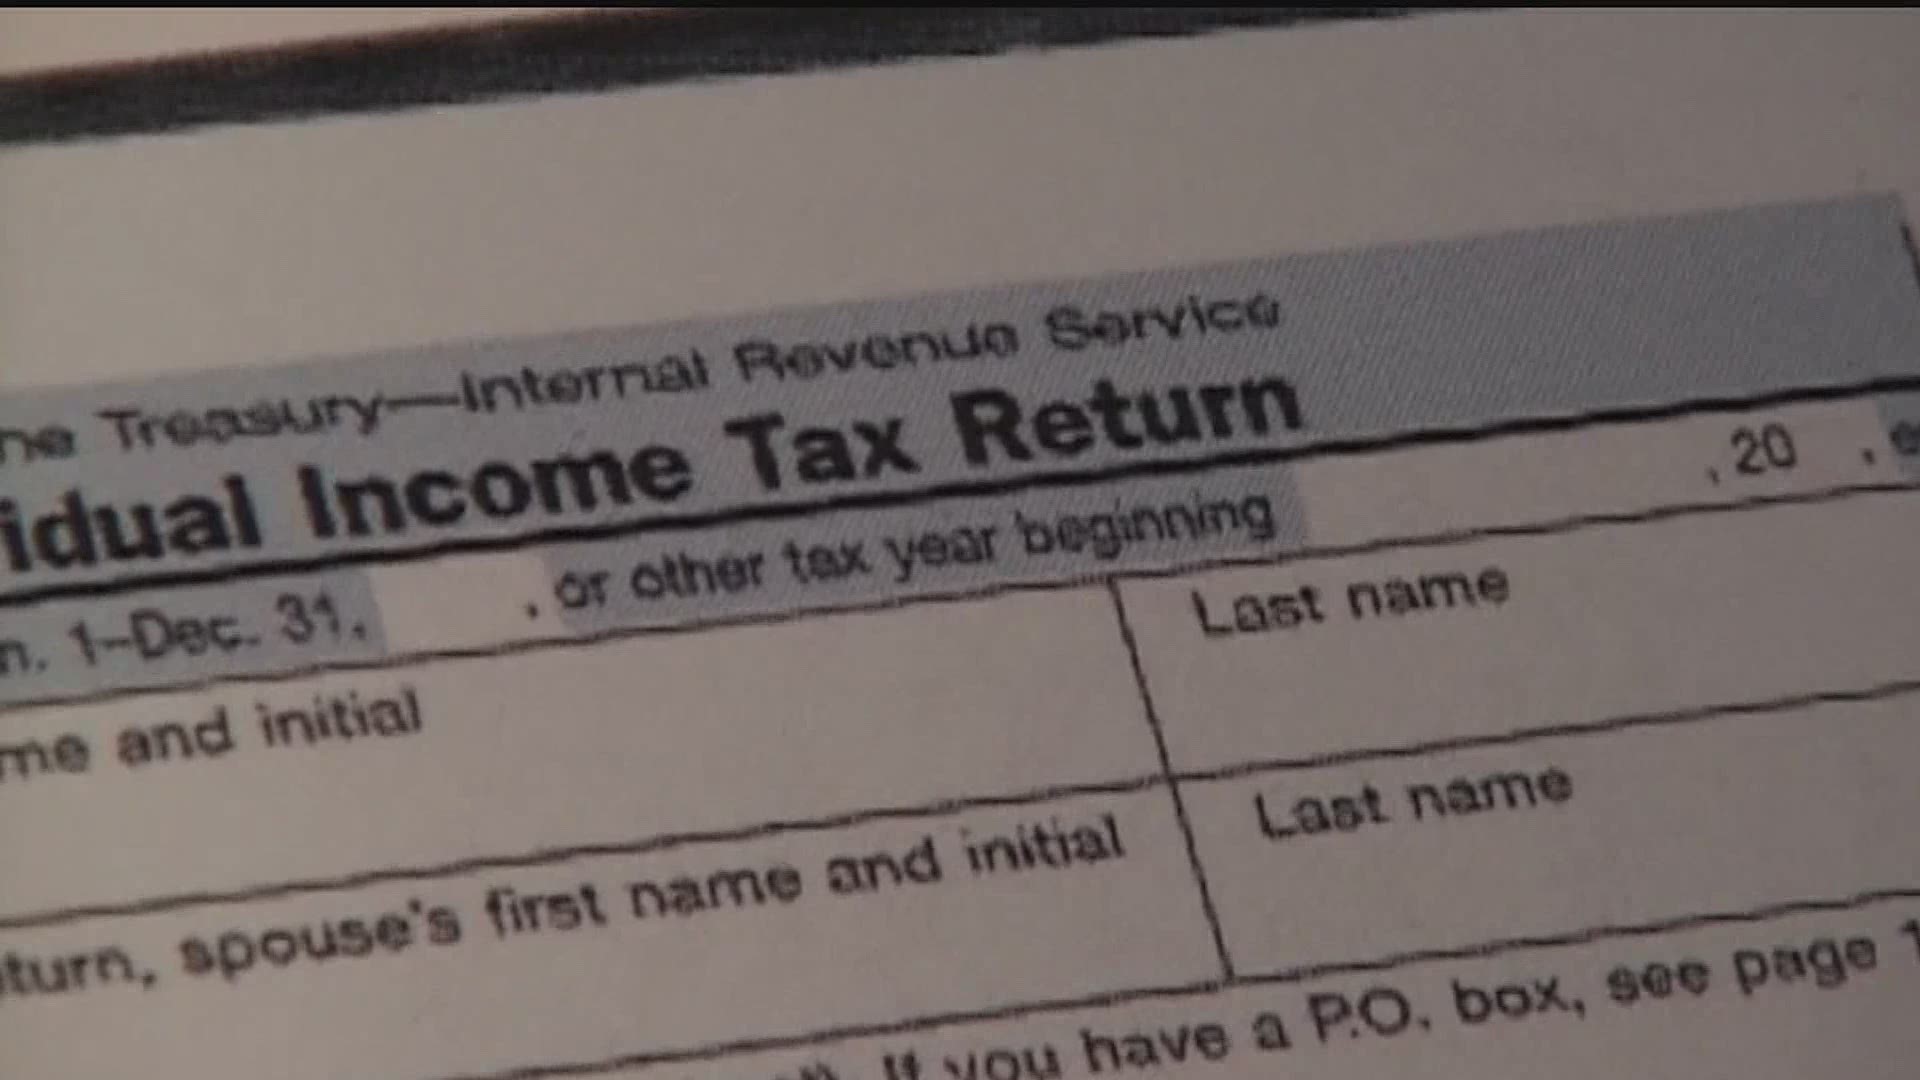 The tax deadline for 2019 has been extended to July 15th. But, many accountants are already looking ahead to what's in store for 2020 returns.